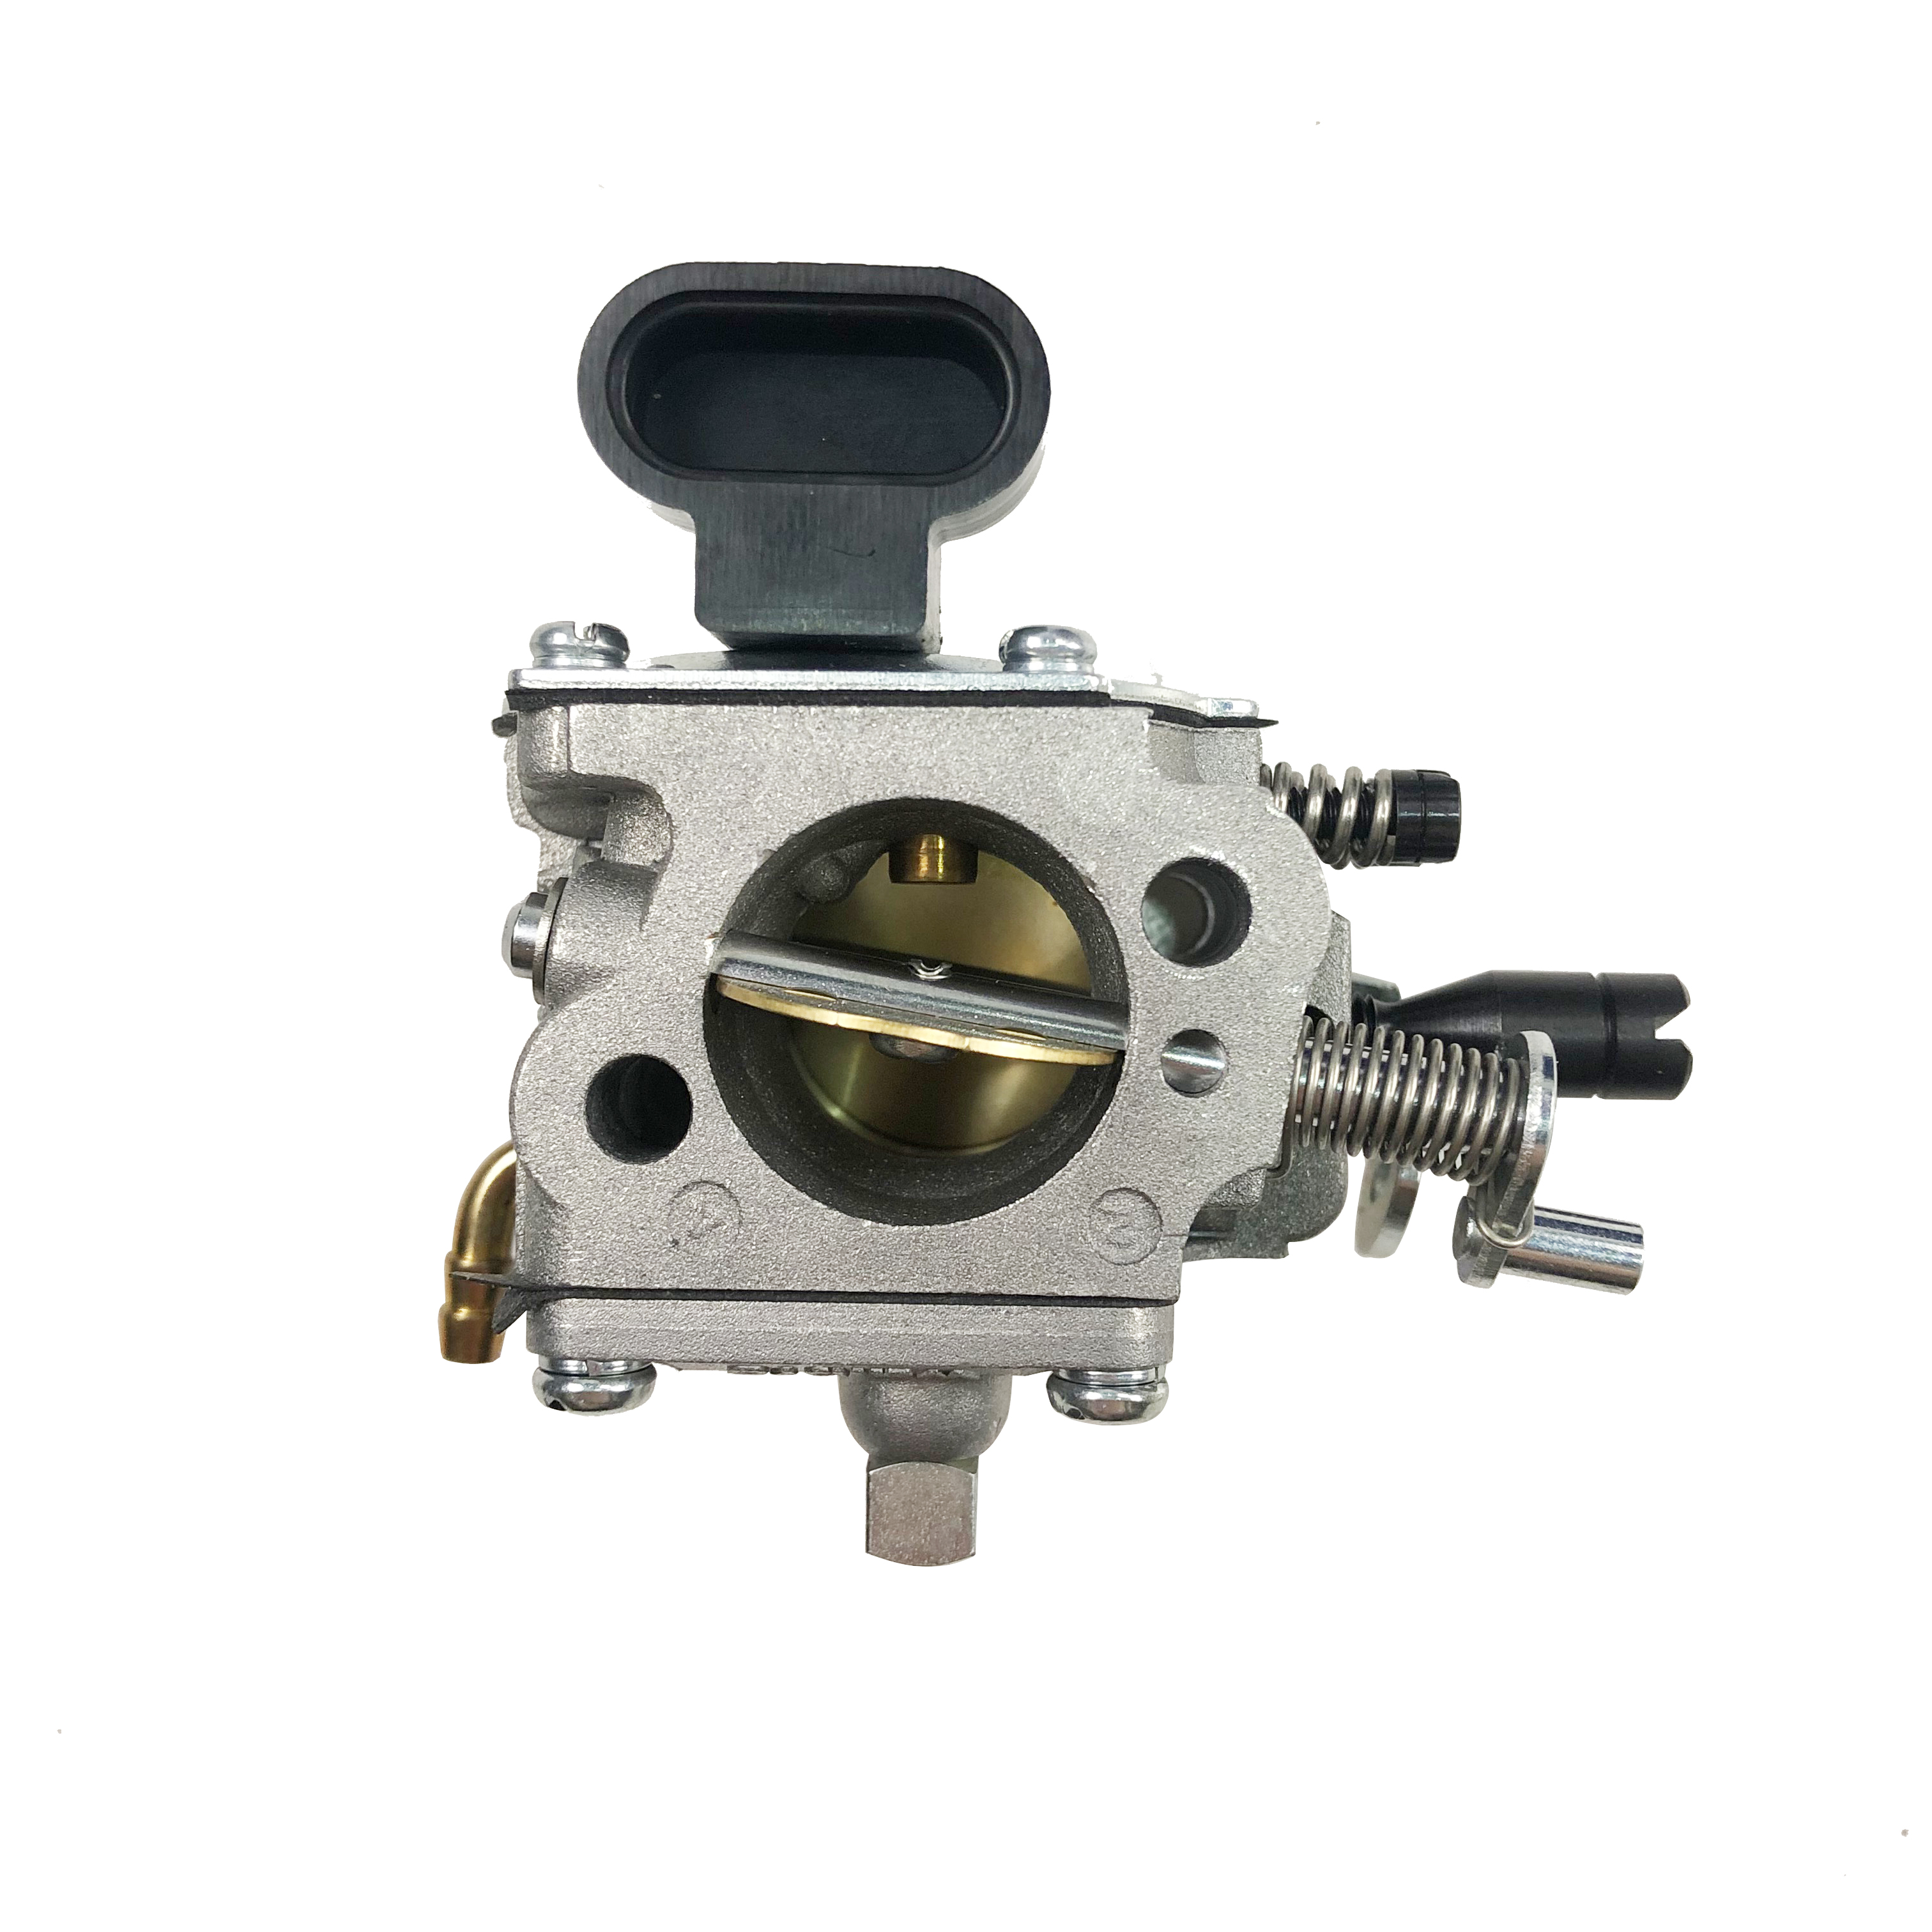 Carburetor Carb Carby For STIHL 066 064 MS660 MS640 Chainsaw OEM 1122 120 0621